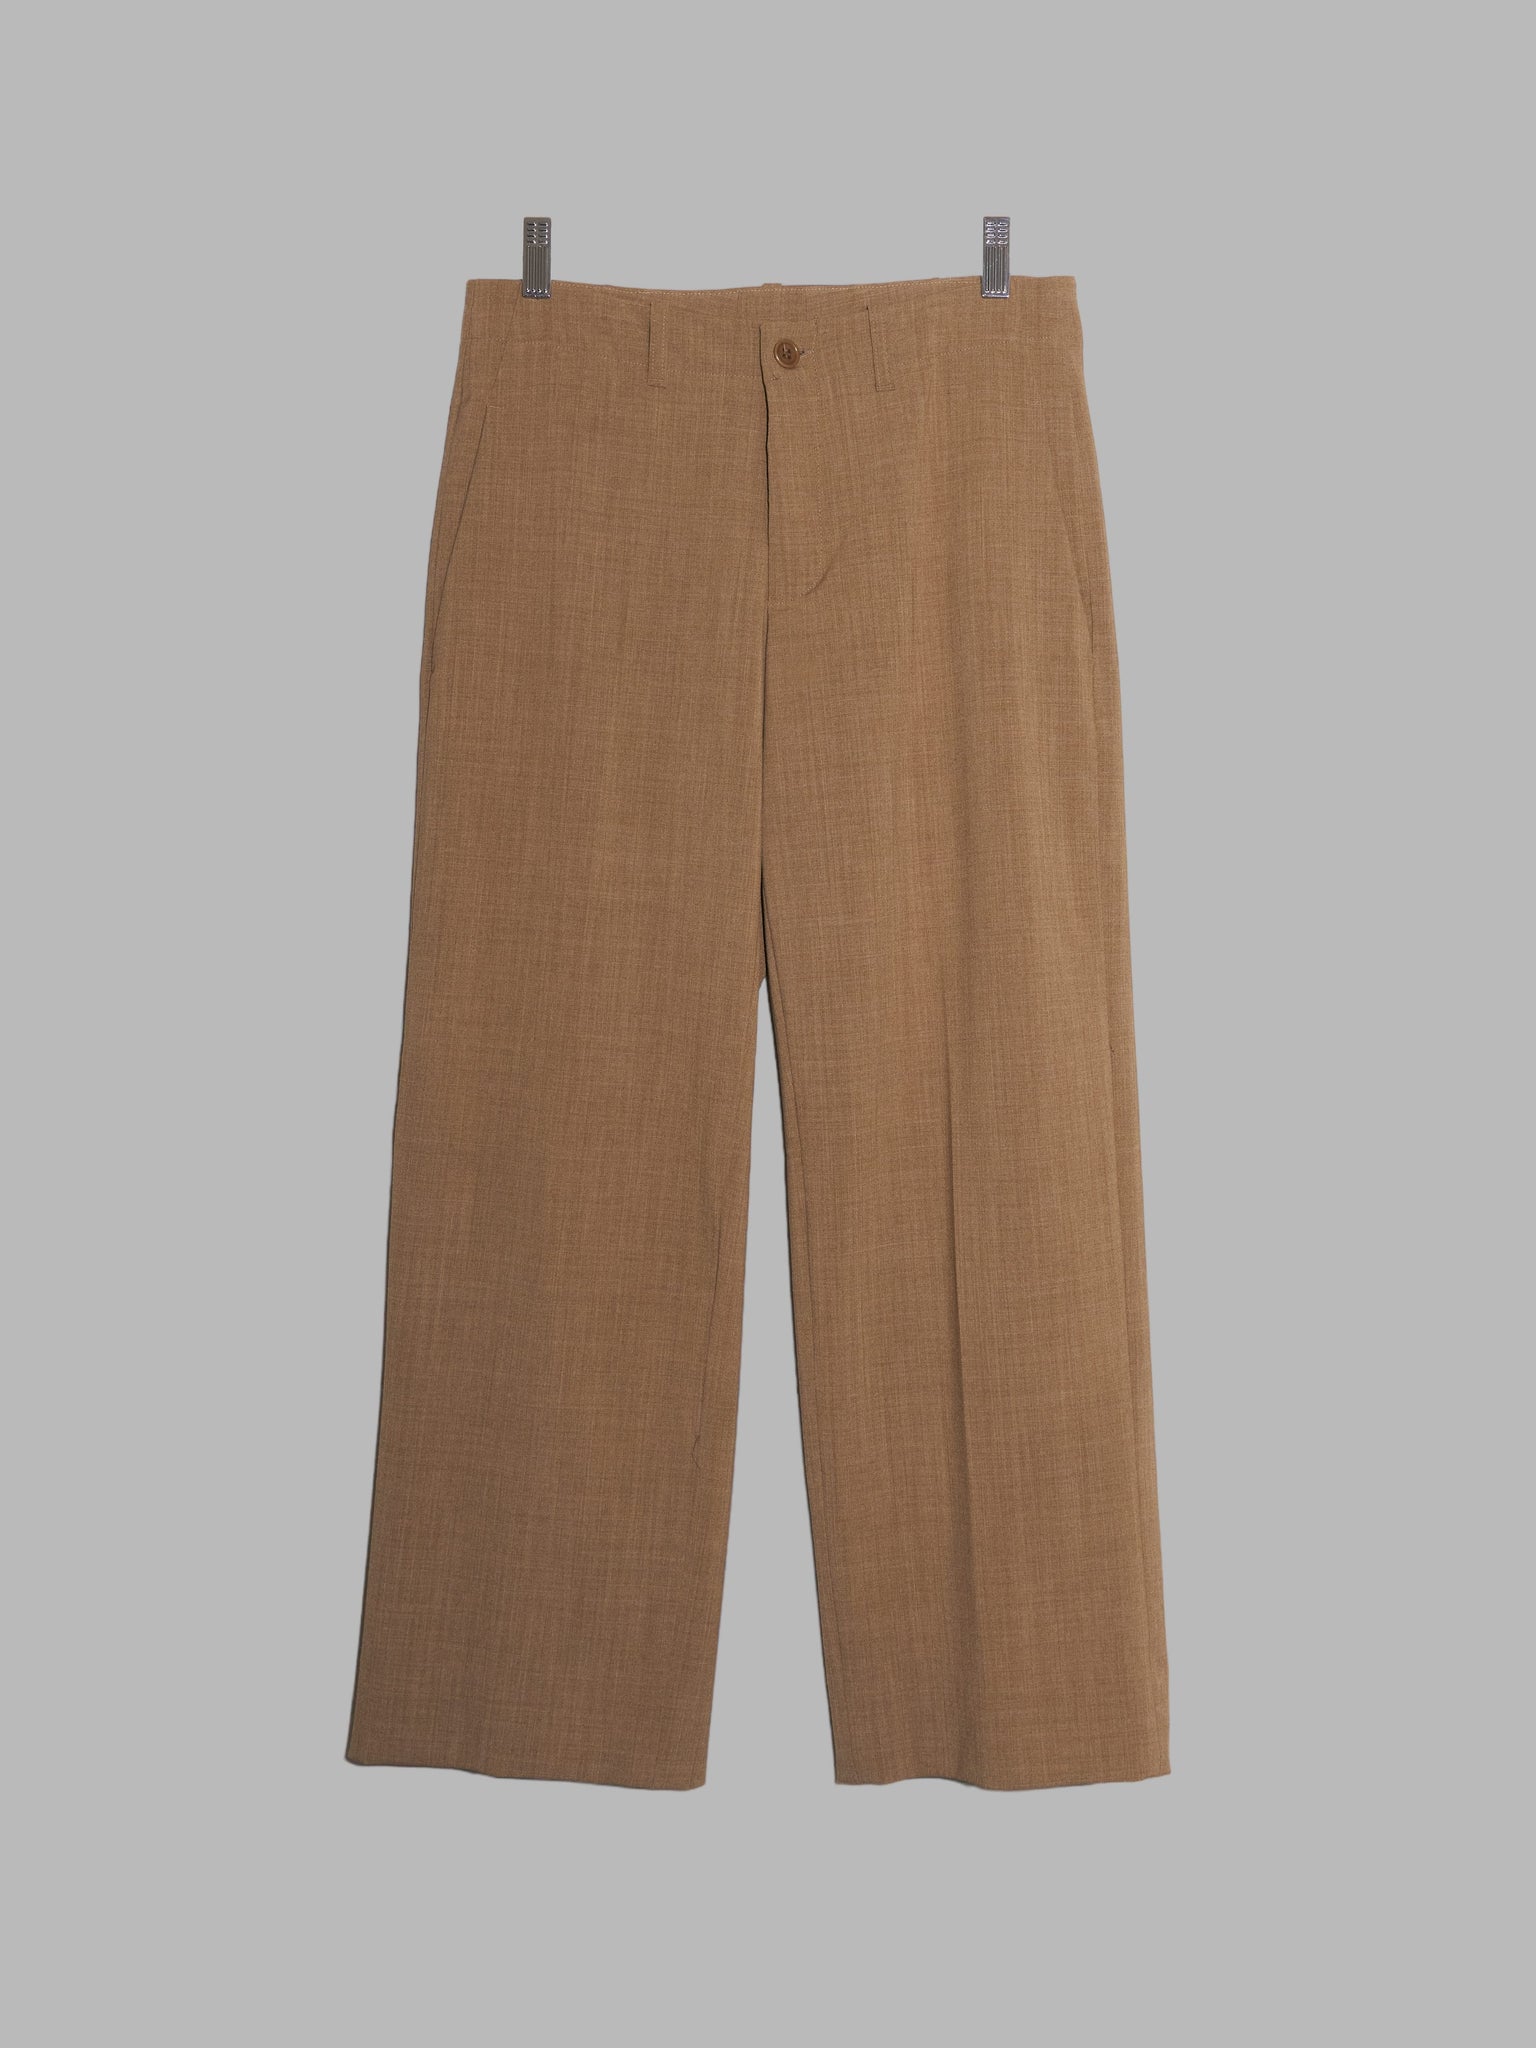 Dirk Bikkembergs 1990s 2000s light brown stretch wool trousers - size 40